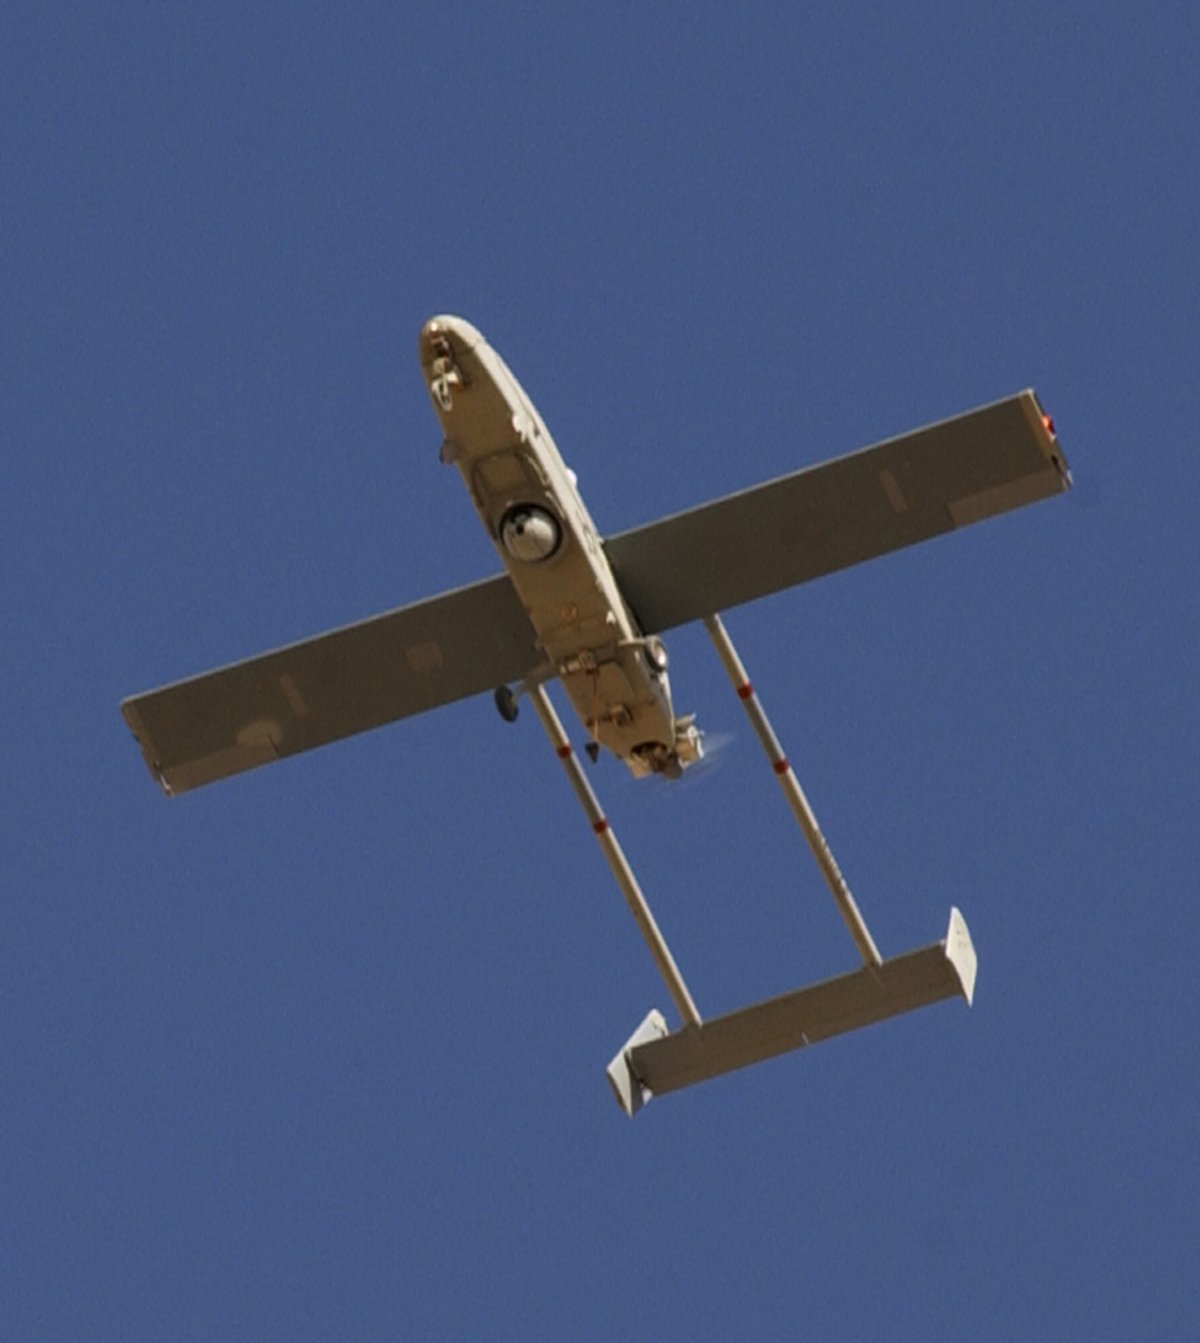 http://upload.wikimedia.org/wikipedia/commons/4/4d/Pioneer_Unmanned_Aerial_Vehicle.jpg